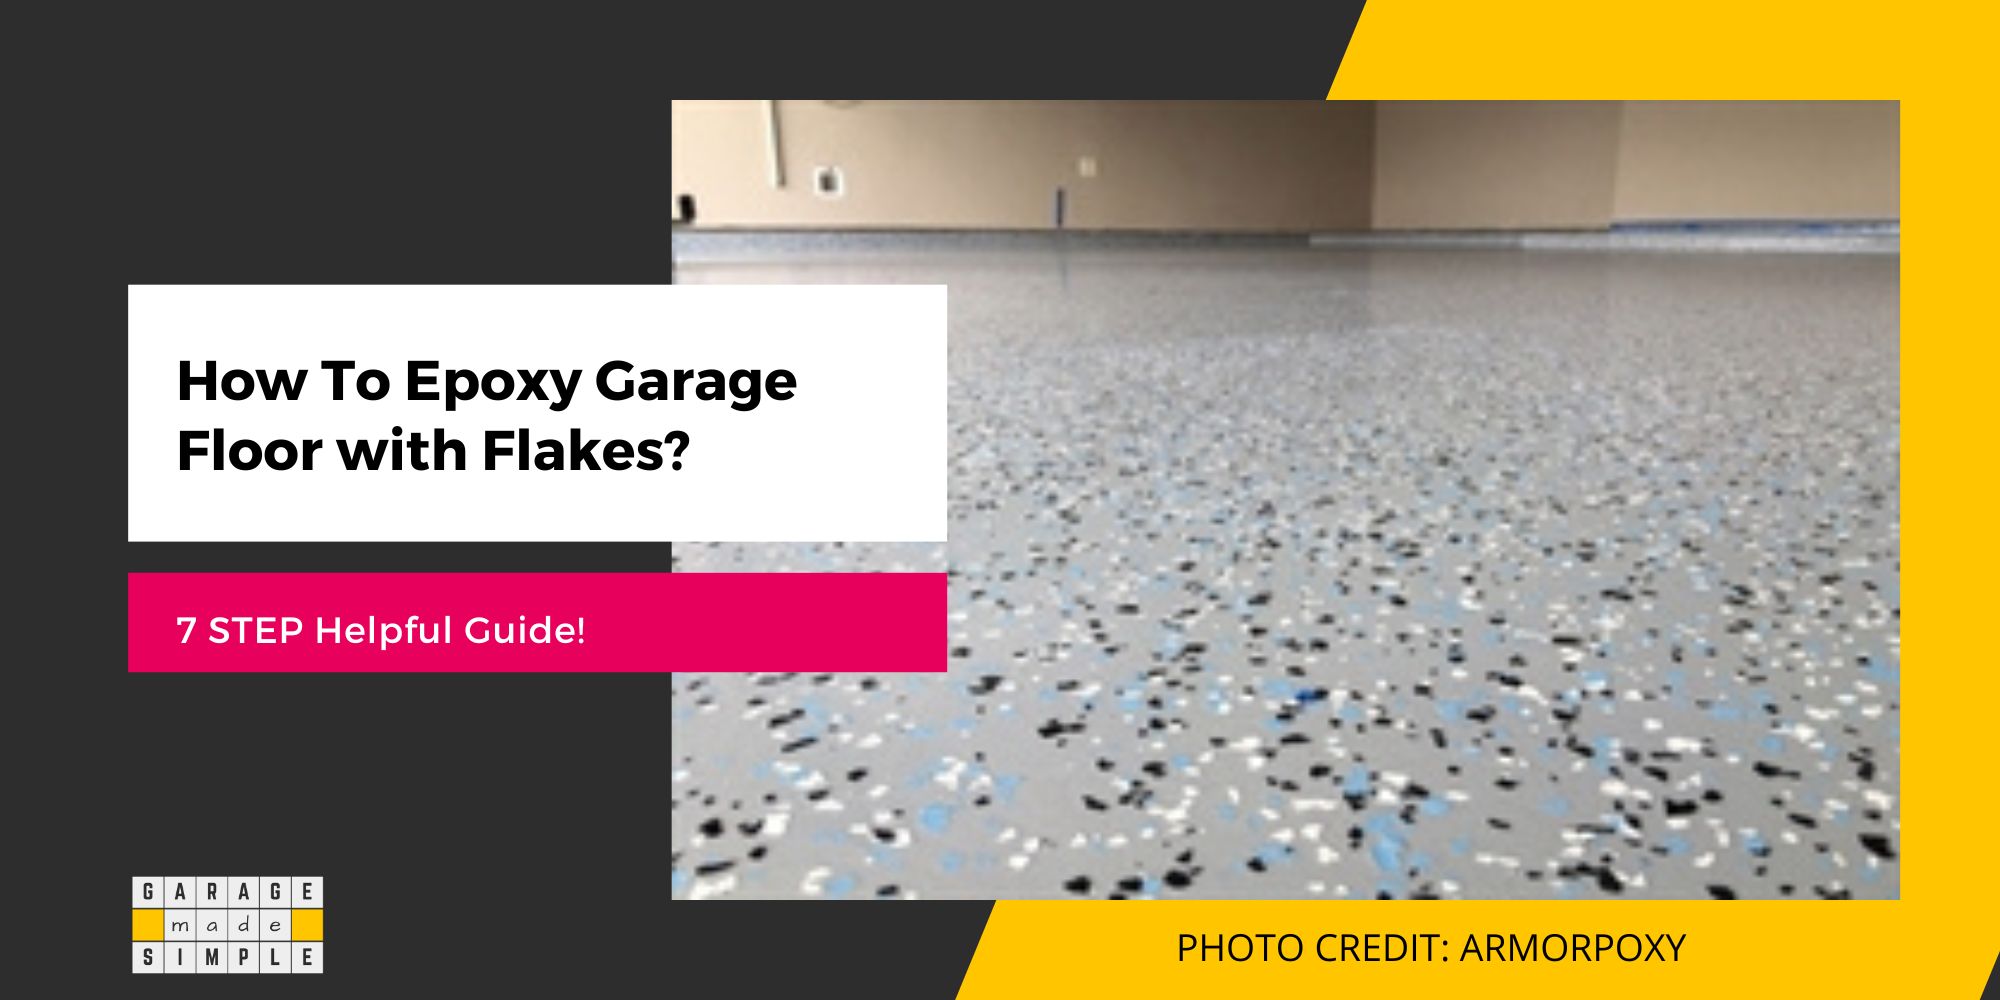 7 Step Helpful Guide On How to Epoxy a Garage Floor with Flakes